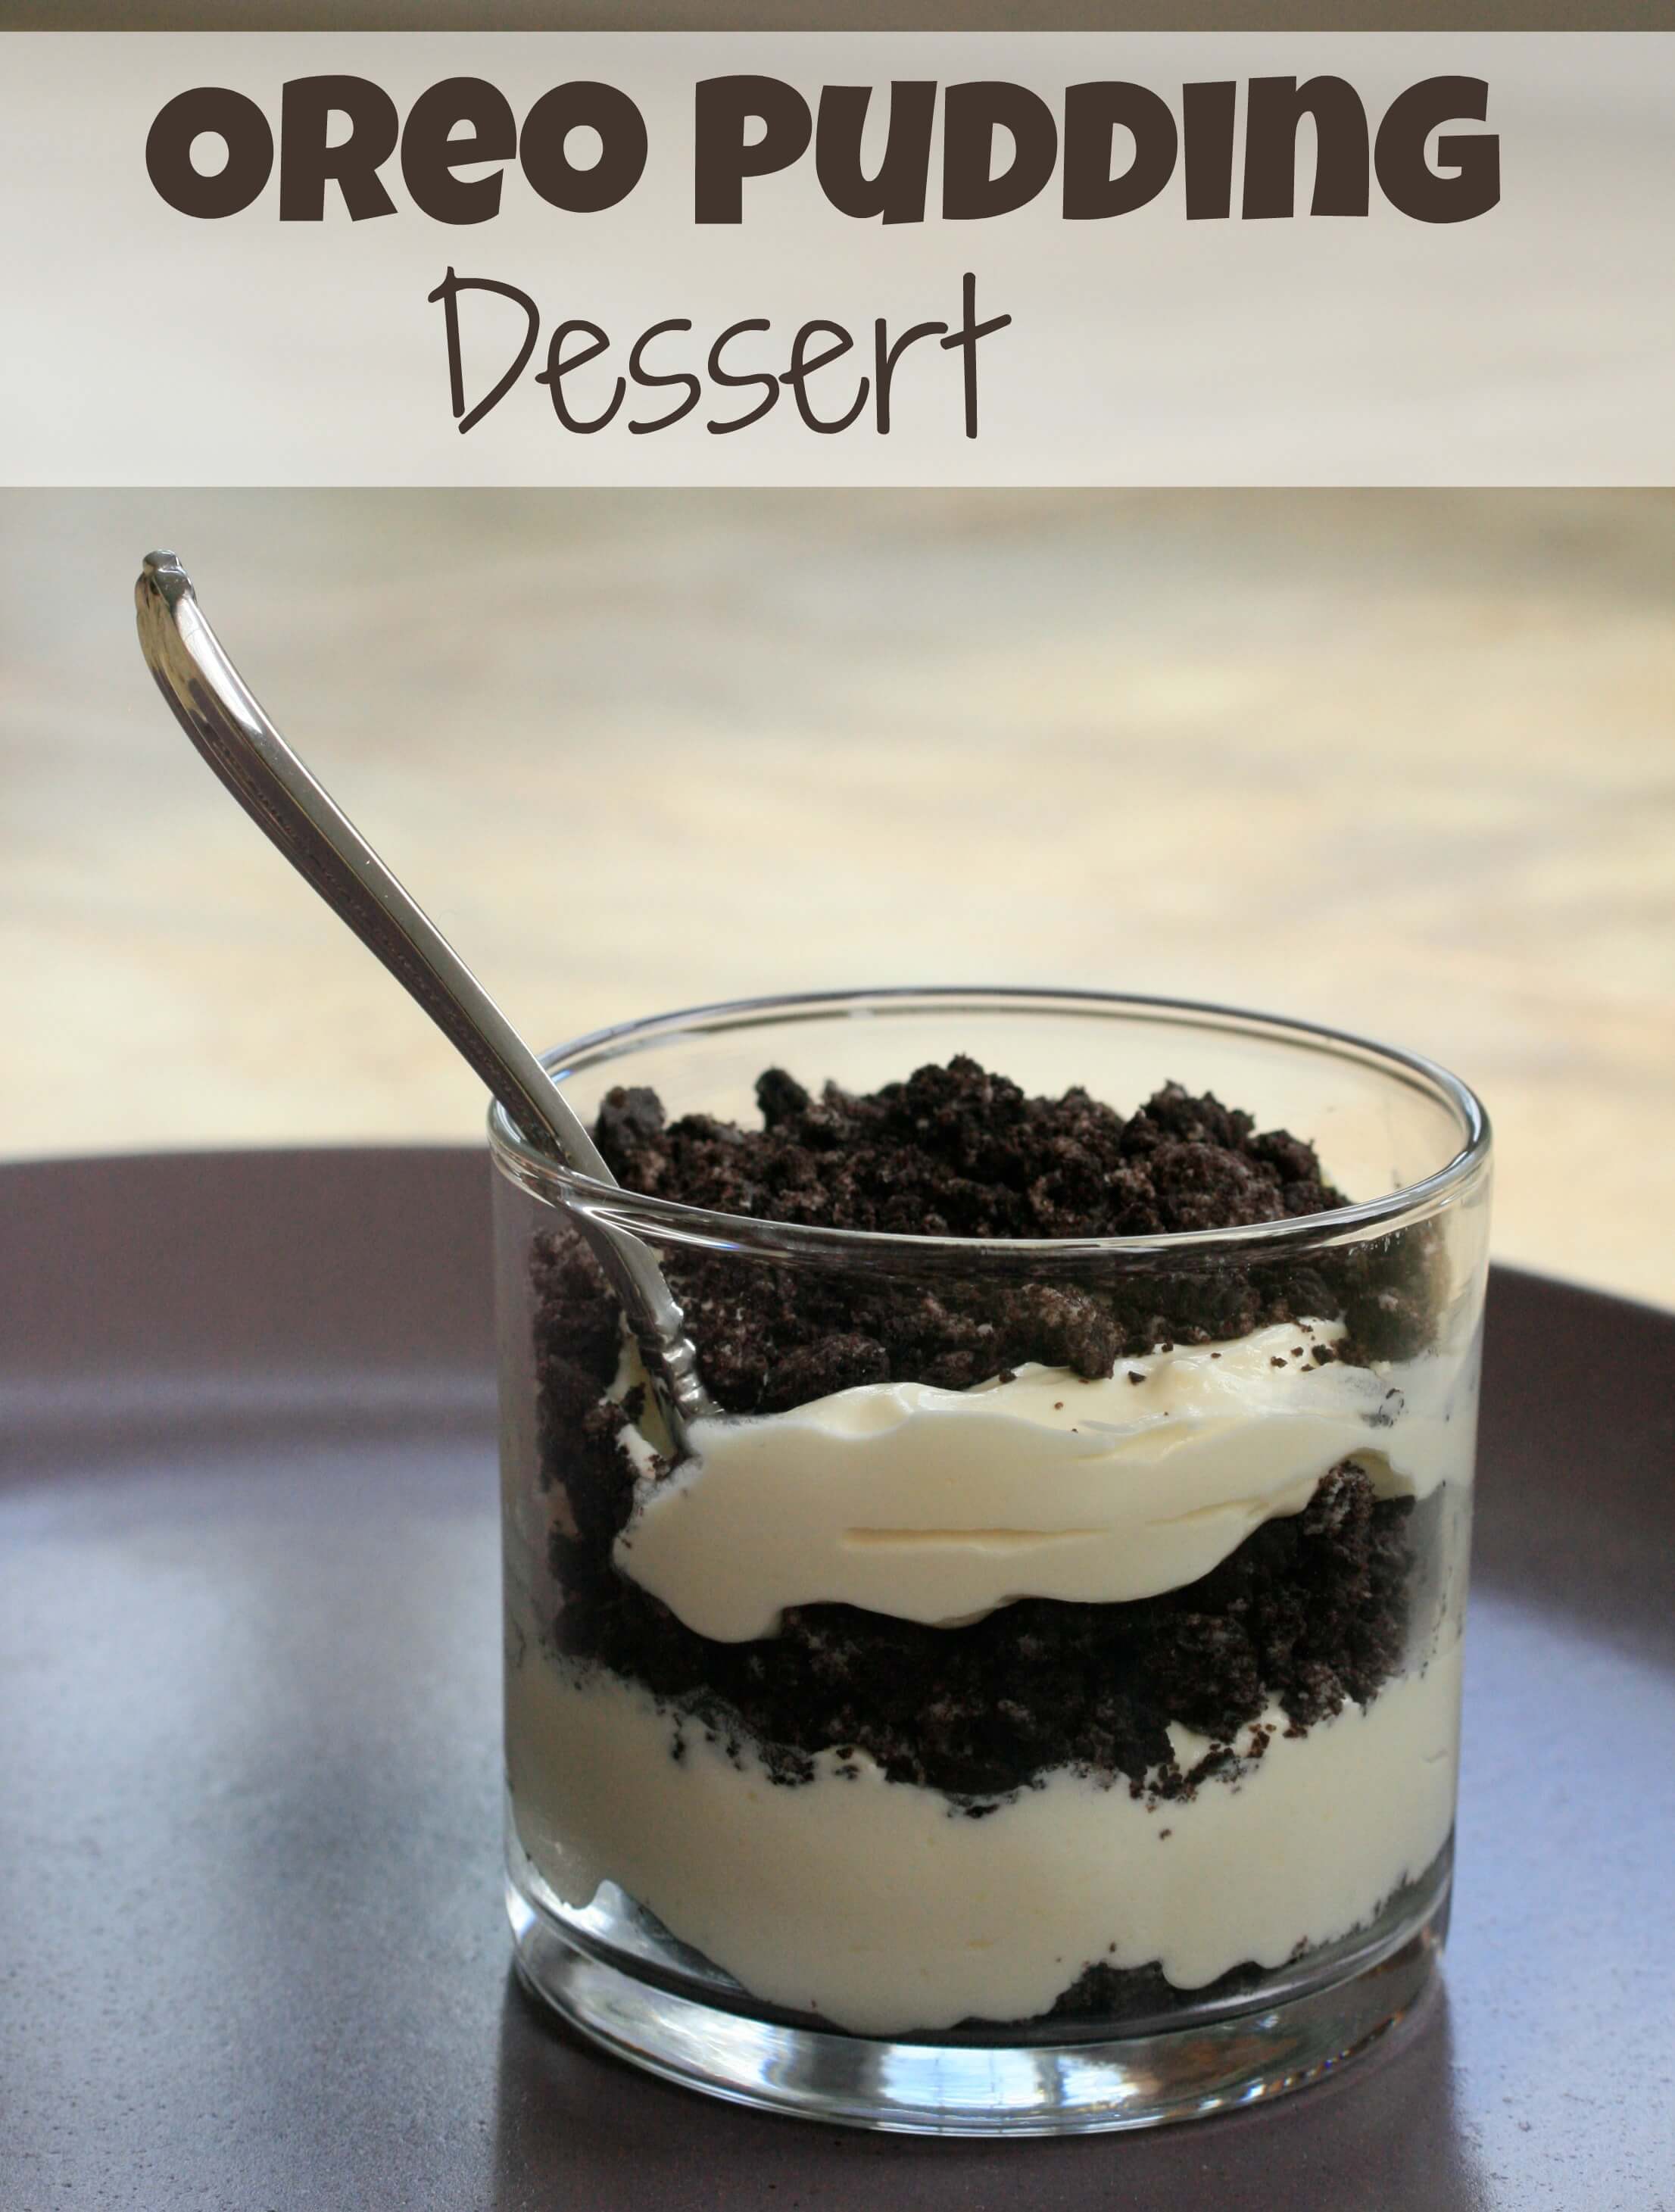 Easy Oreo Pudding Layer Dessert Lew Party Of 2 The Delicious Oreo Layer Dessert The Perfect